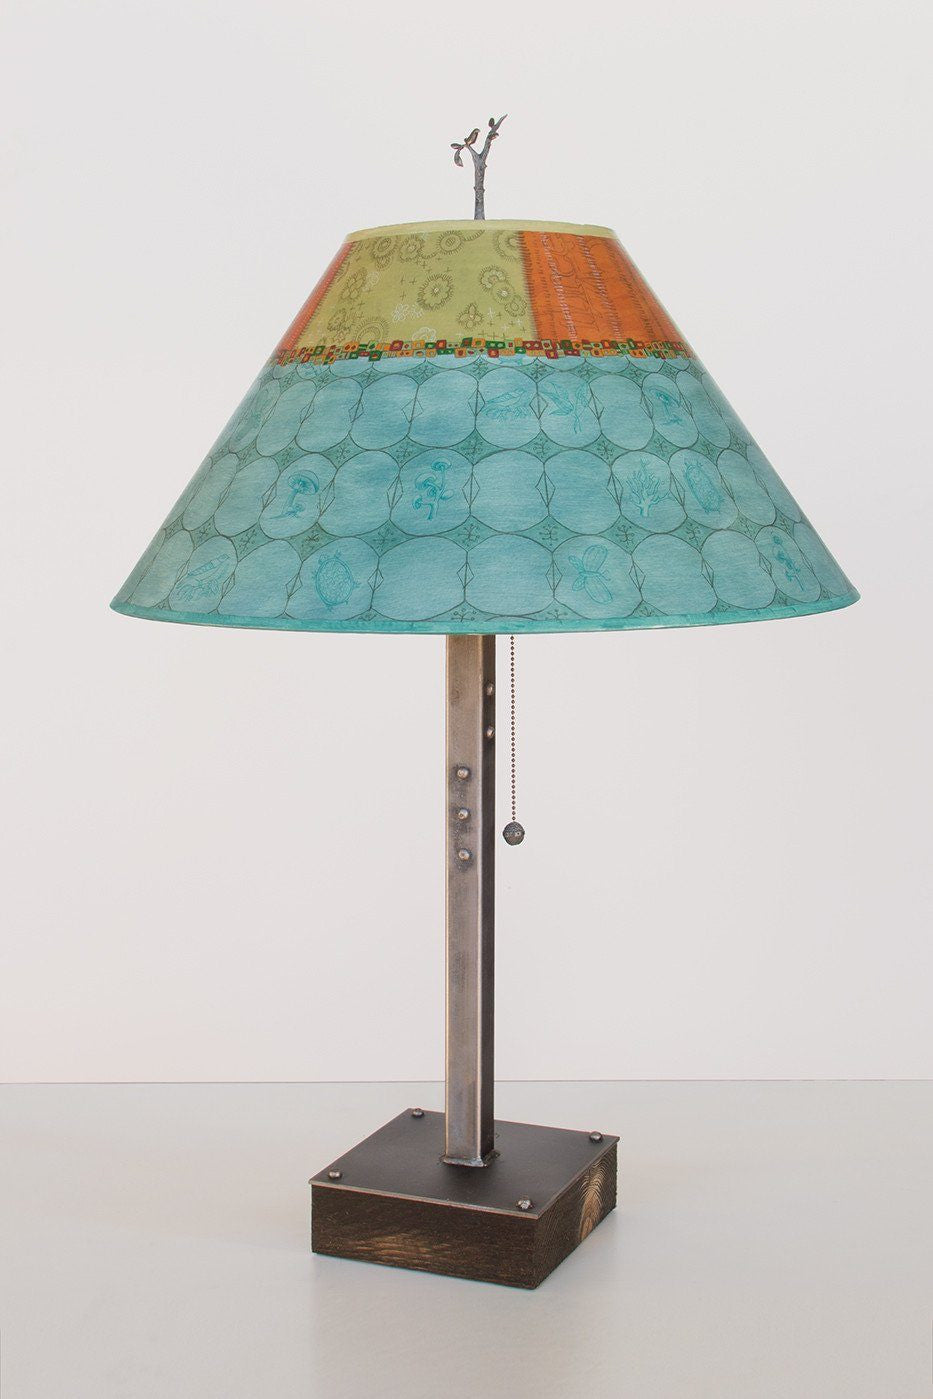 Janna Ugone & Co Table Lamps Steel Table Lamp on Wood with Large Conical Shade in Paradise Pool